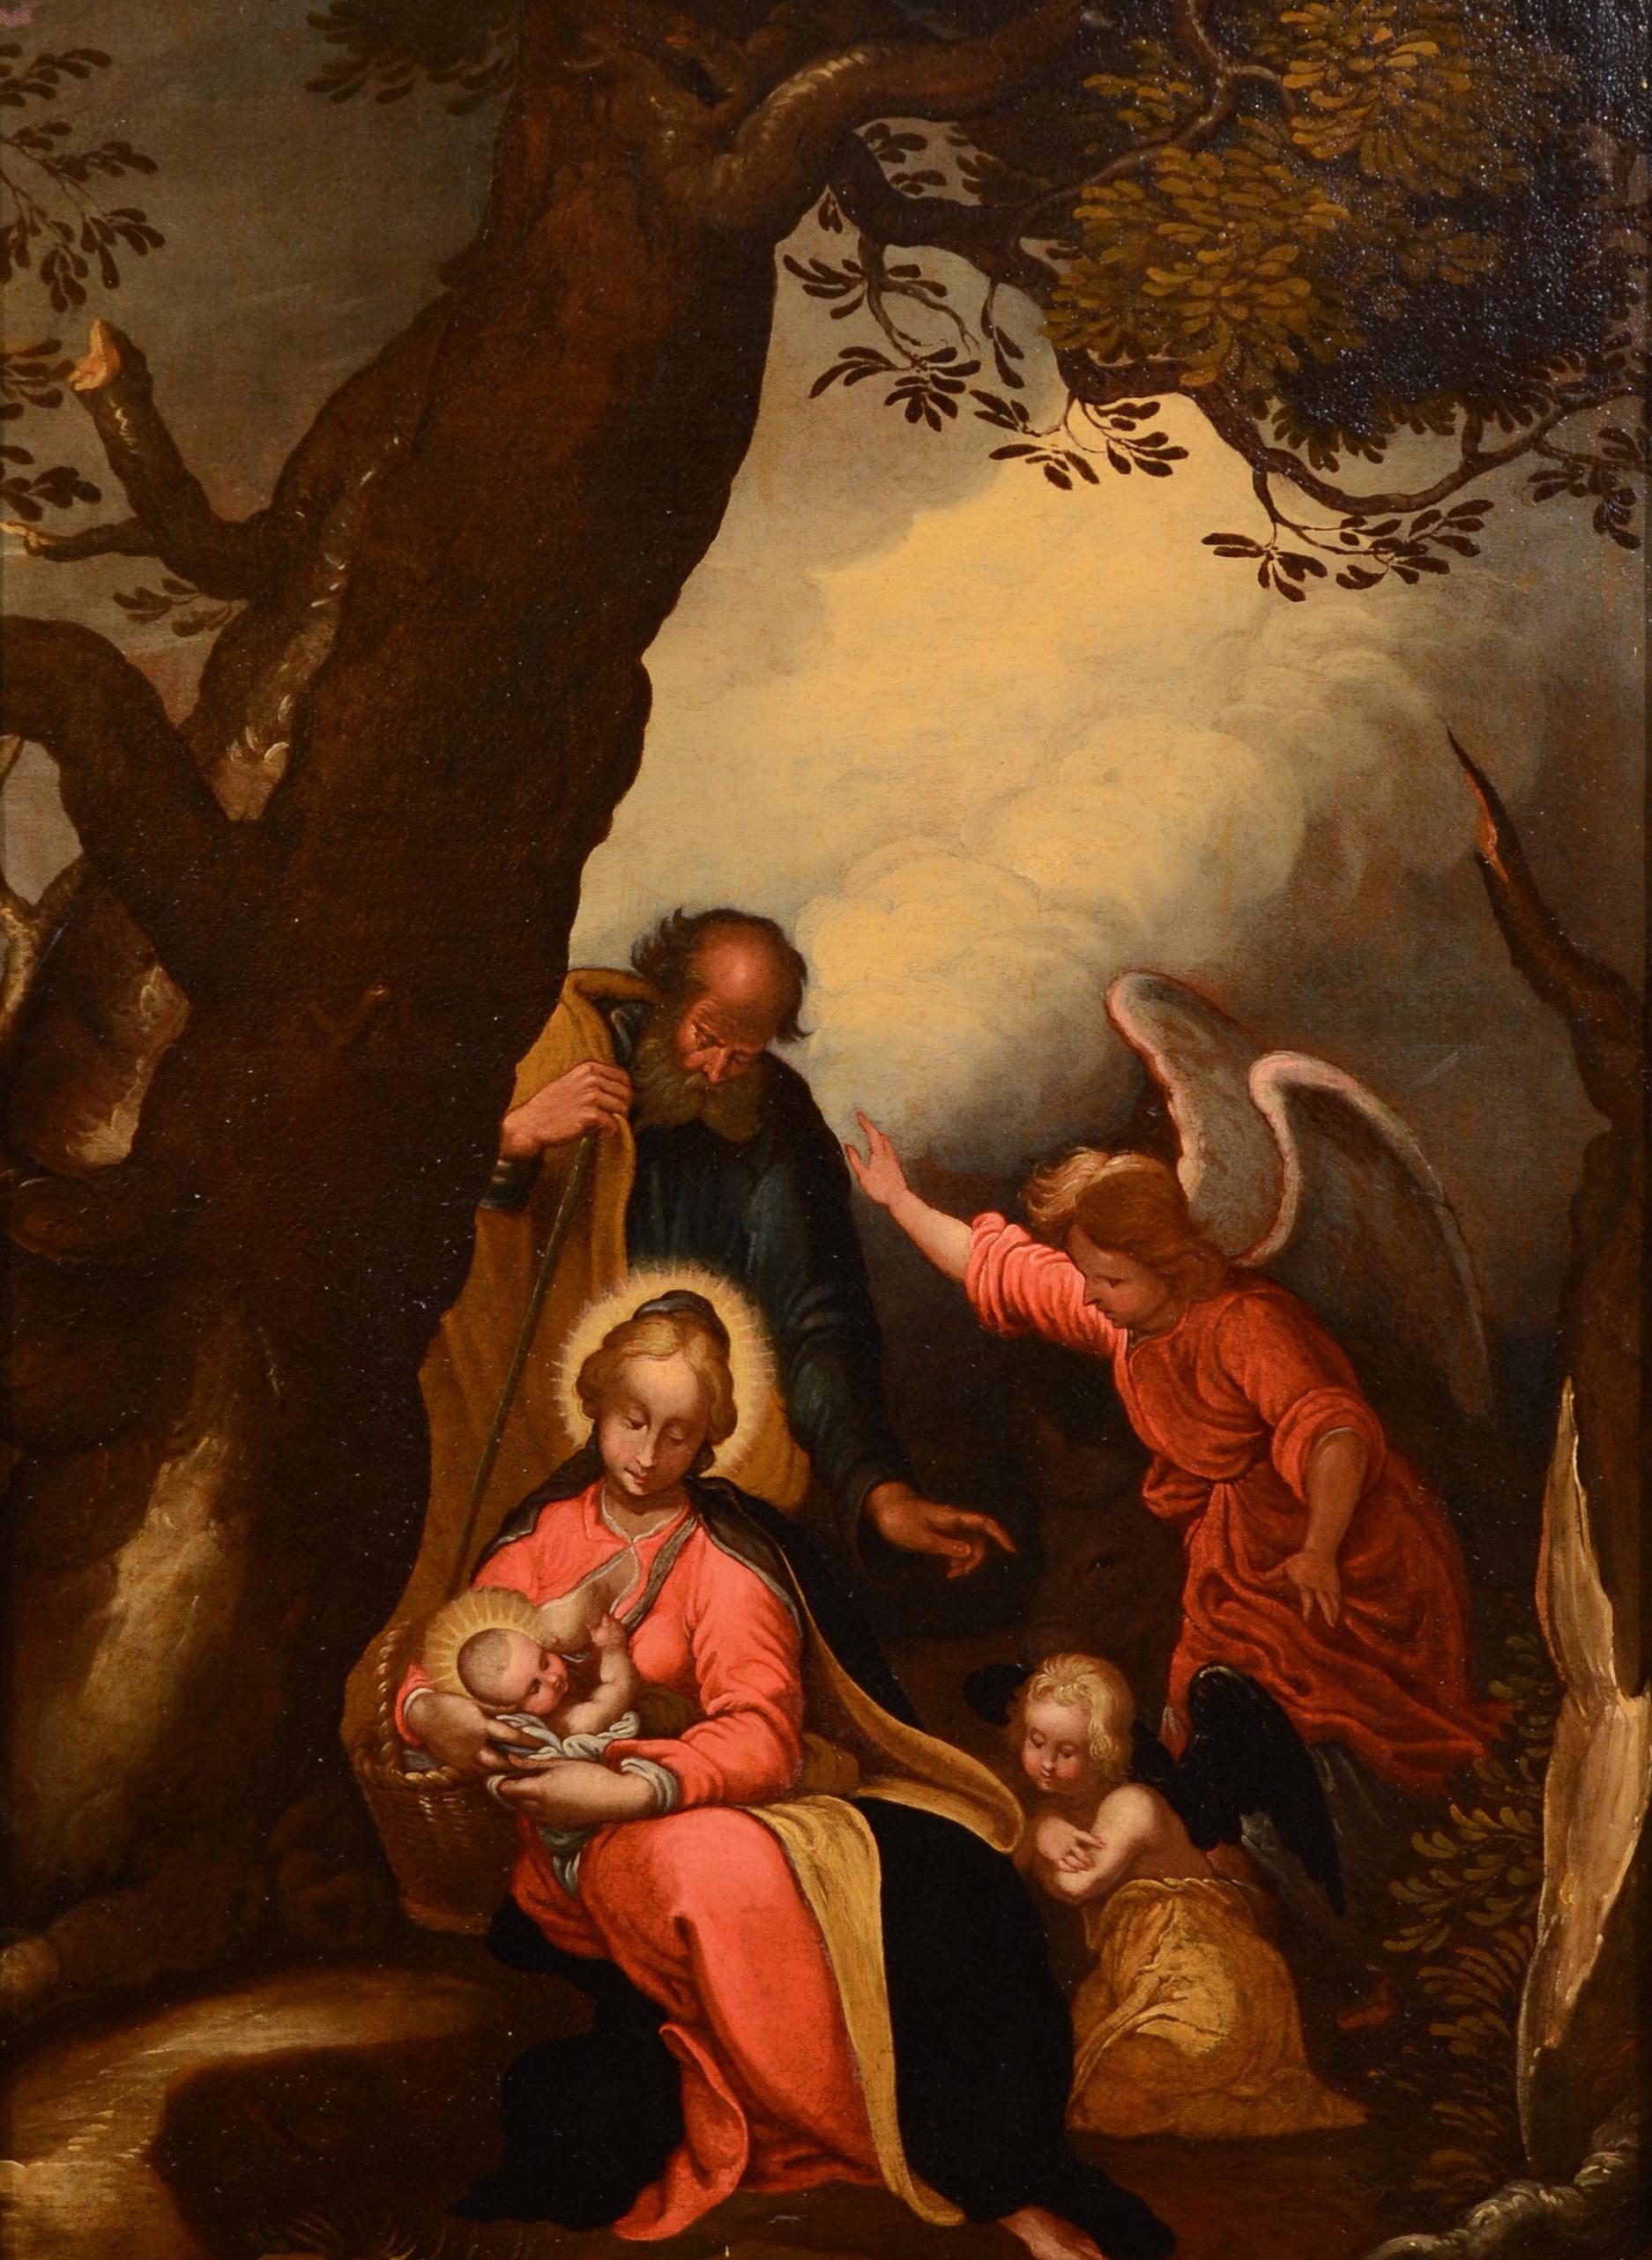 Holy Family Paint Oil on canvas Old master 17th Century Roma school Italy Art - Painting by Unknown